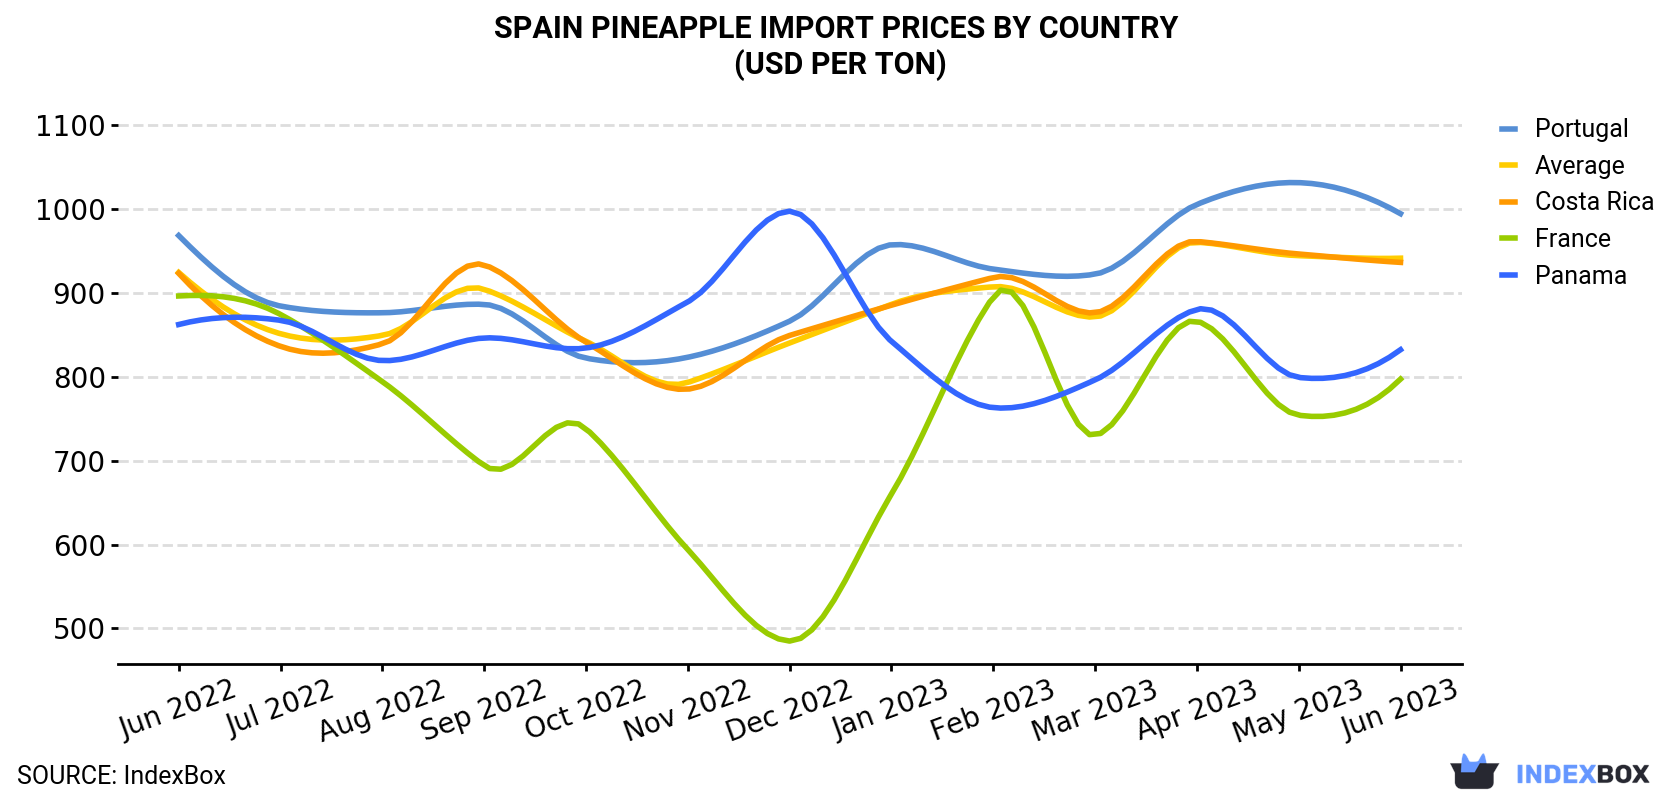 Spain Pineapple Import Prices By Country (USD Per Ton)